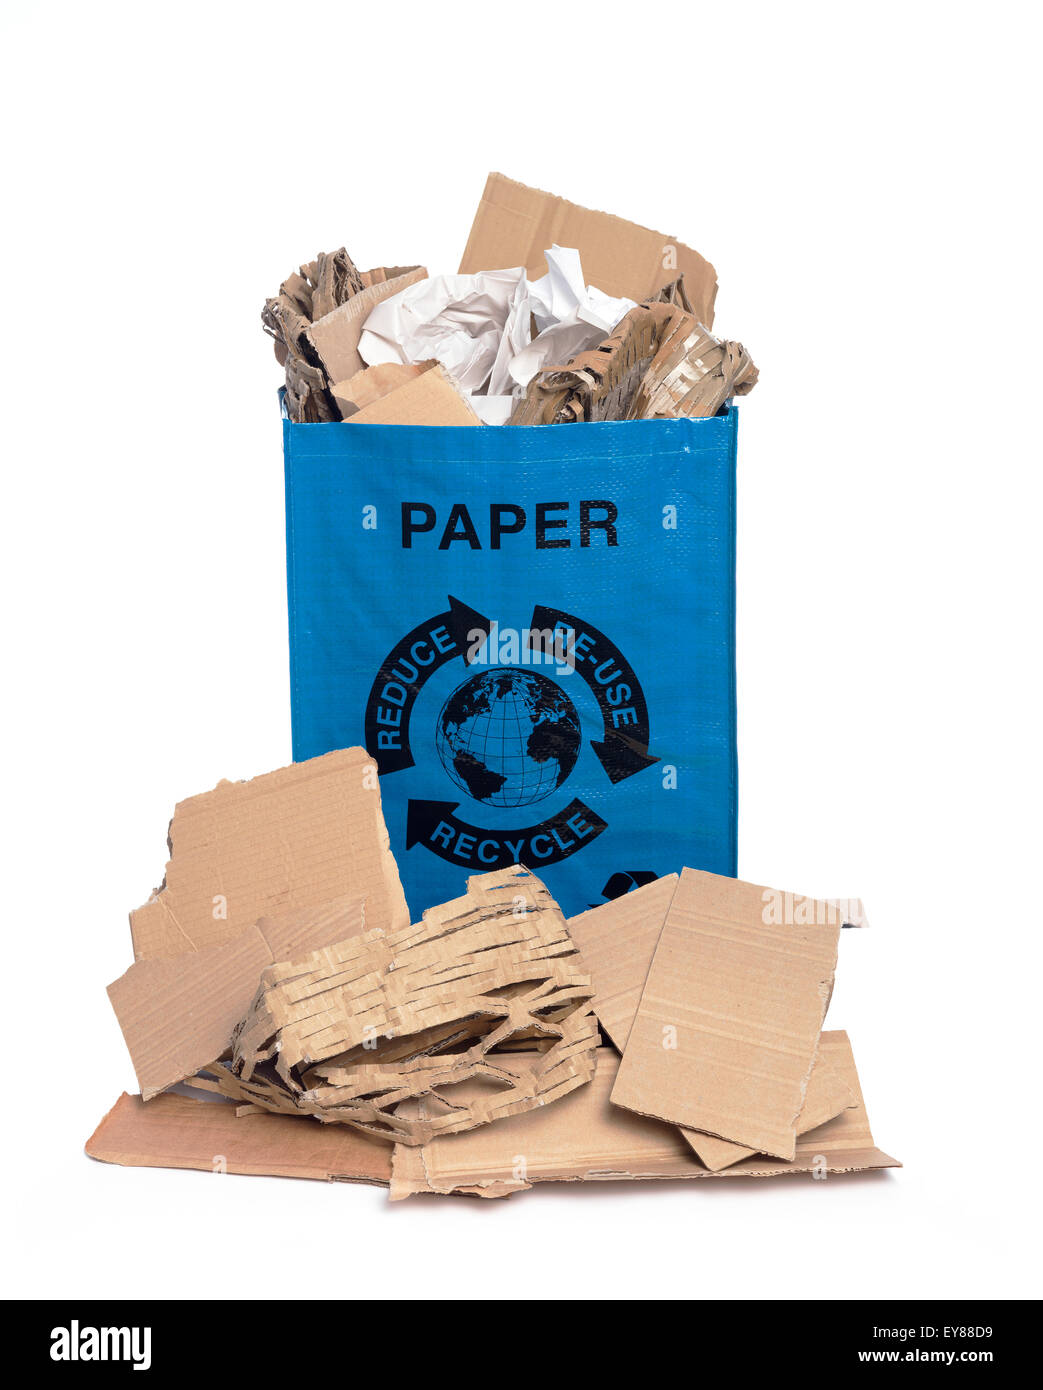 Recycle Paper Container on a white background Stock Photo